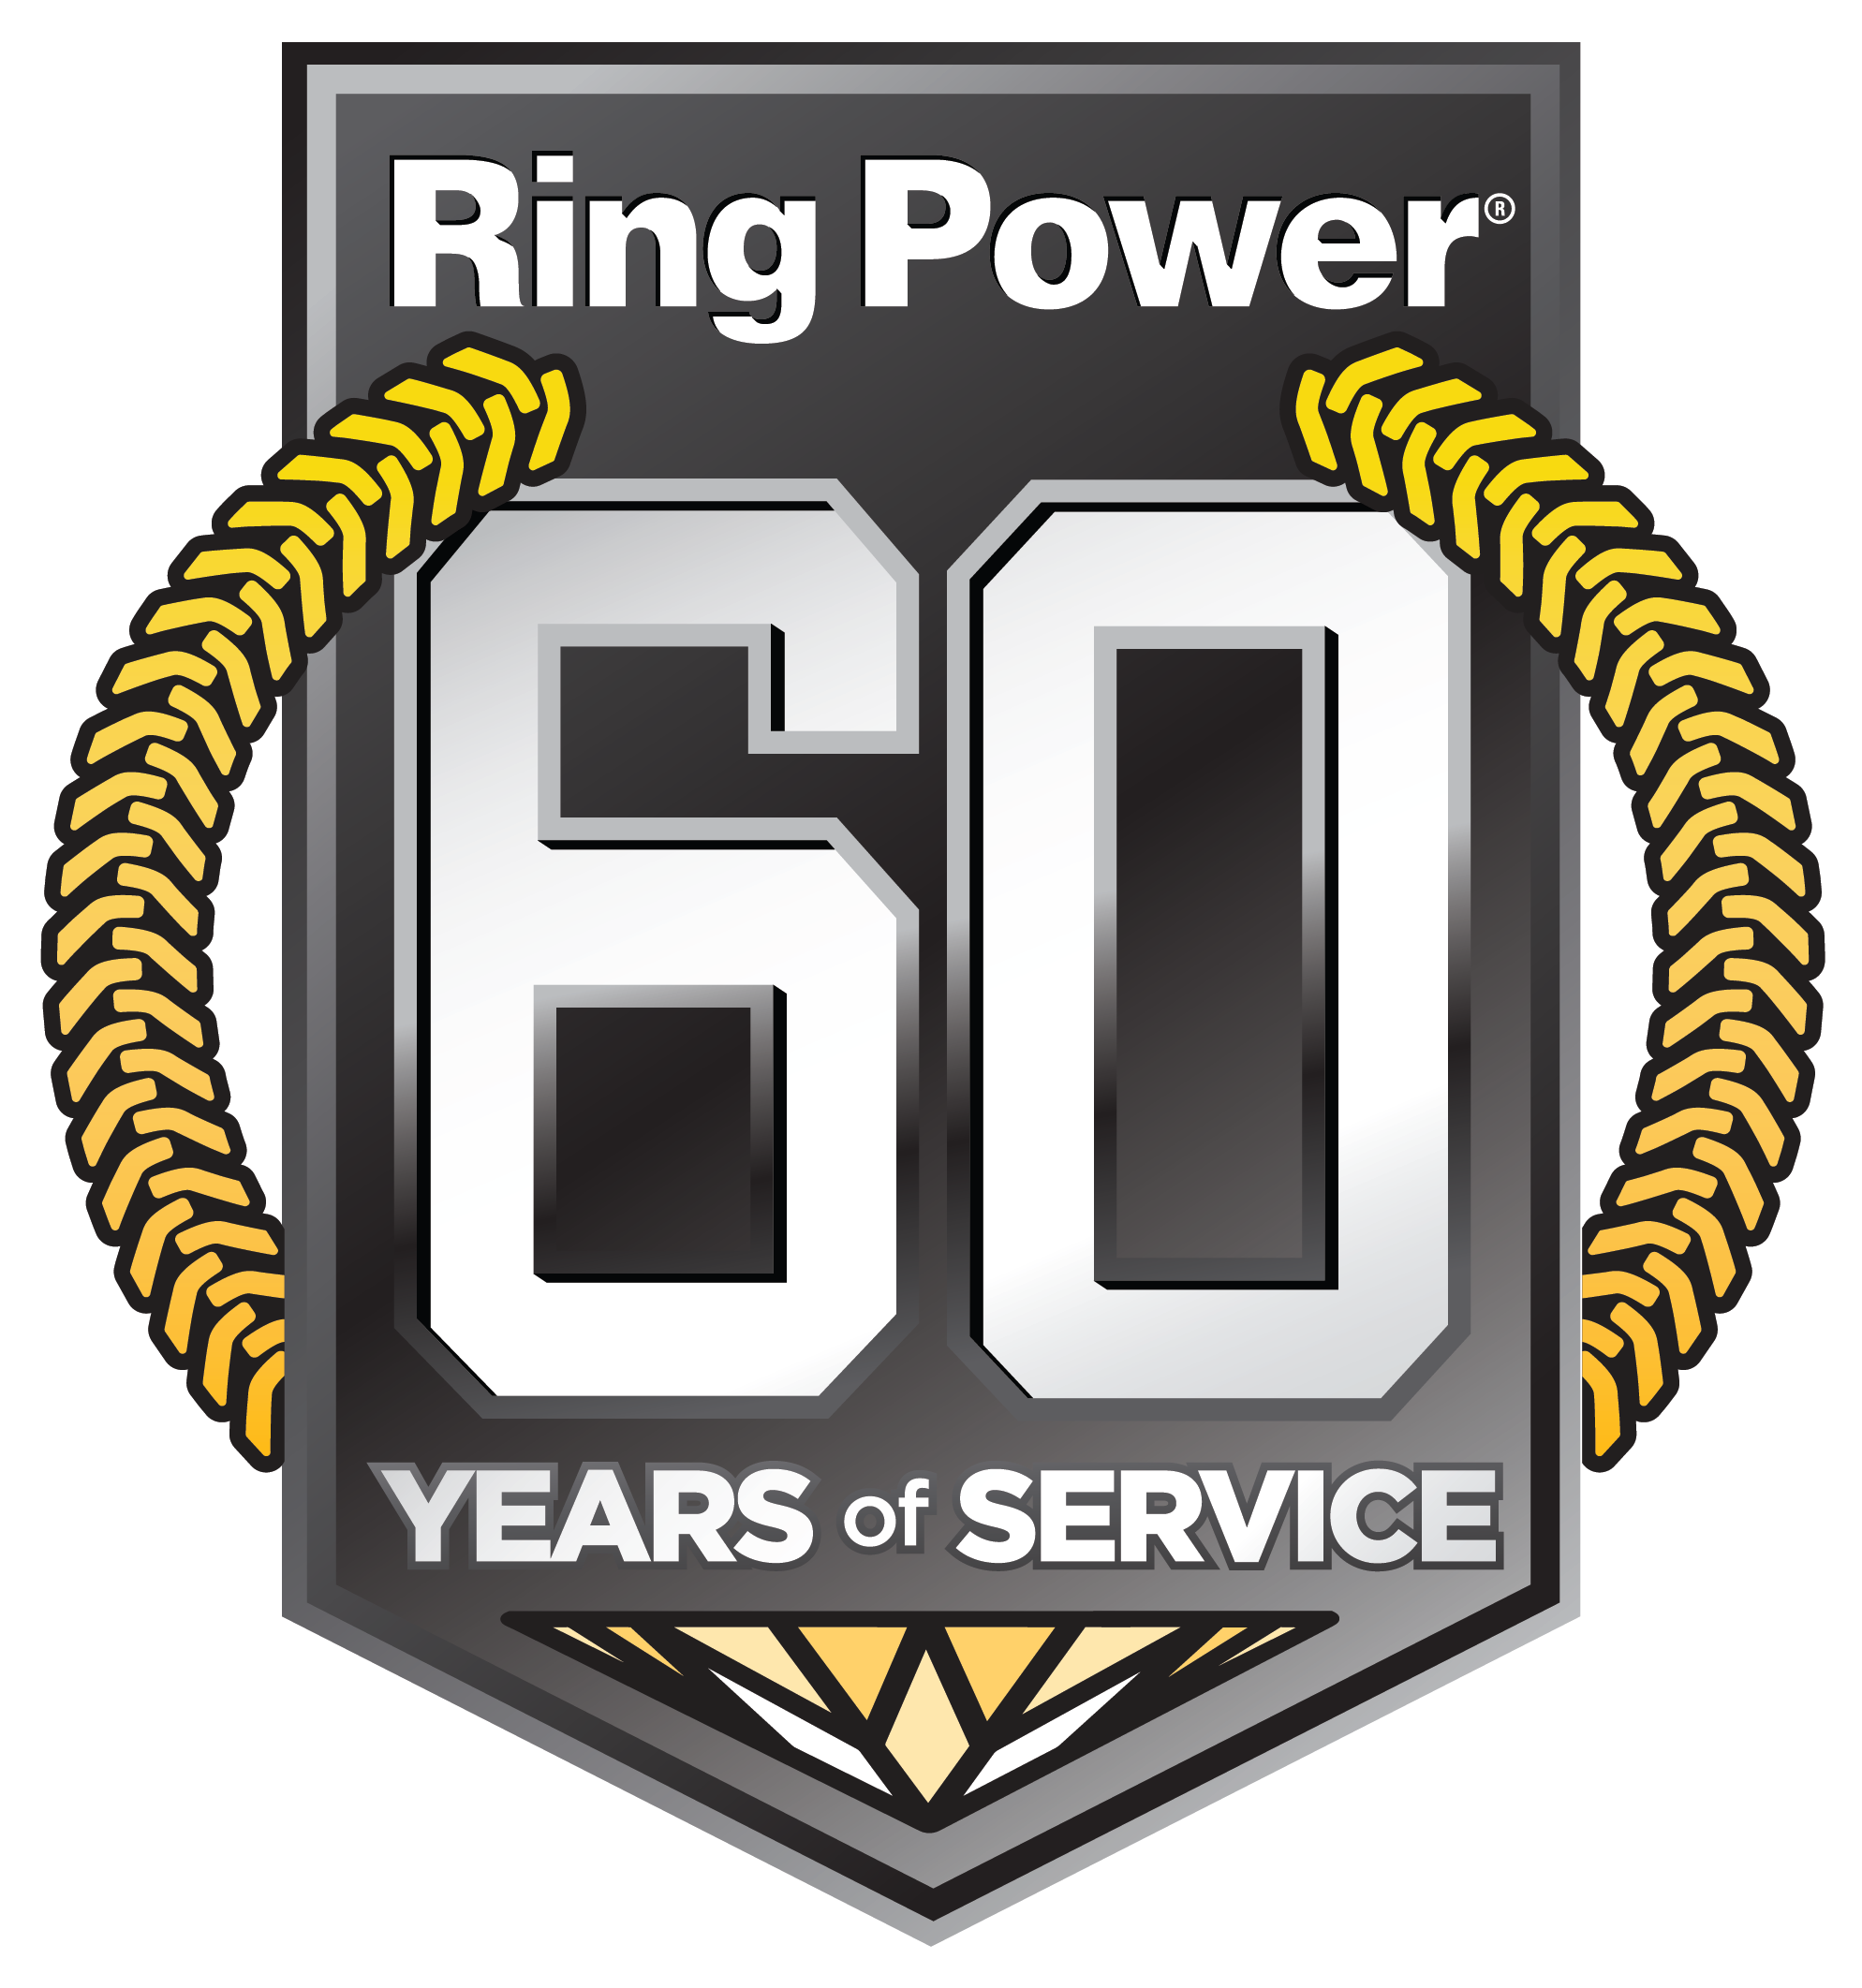 Ring Power Corporation Celebrates 60 Years as Cat® Equipment Dealer